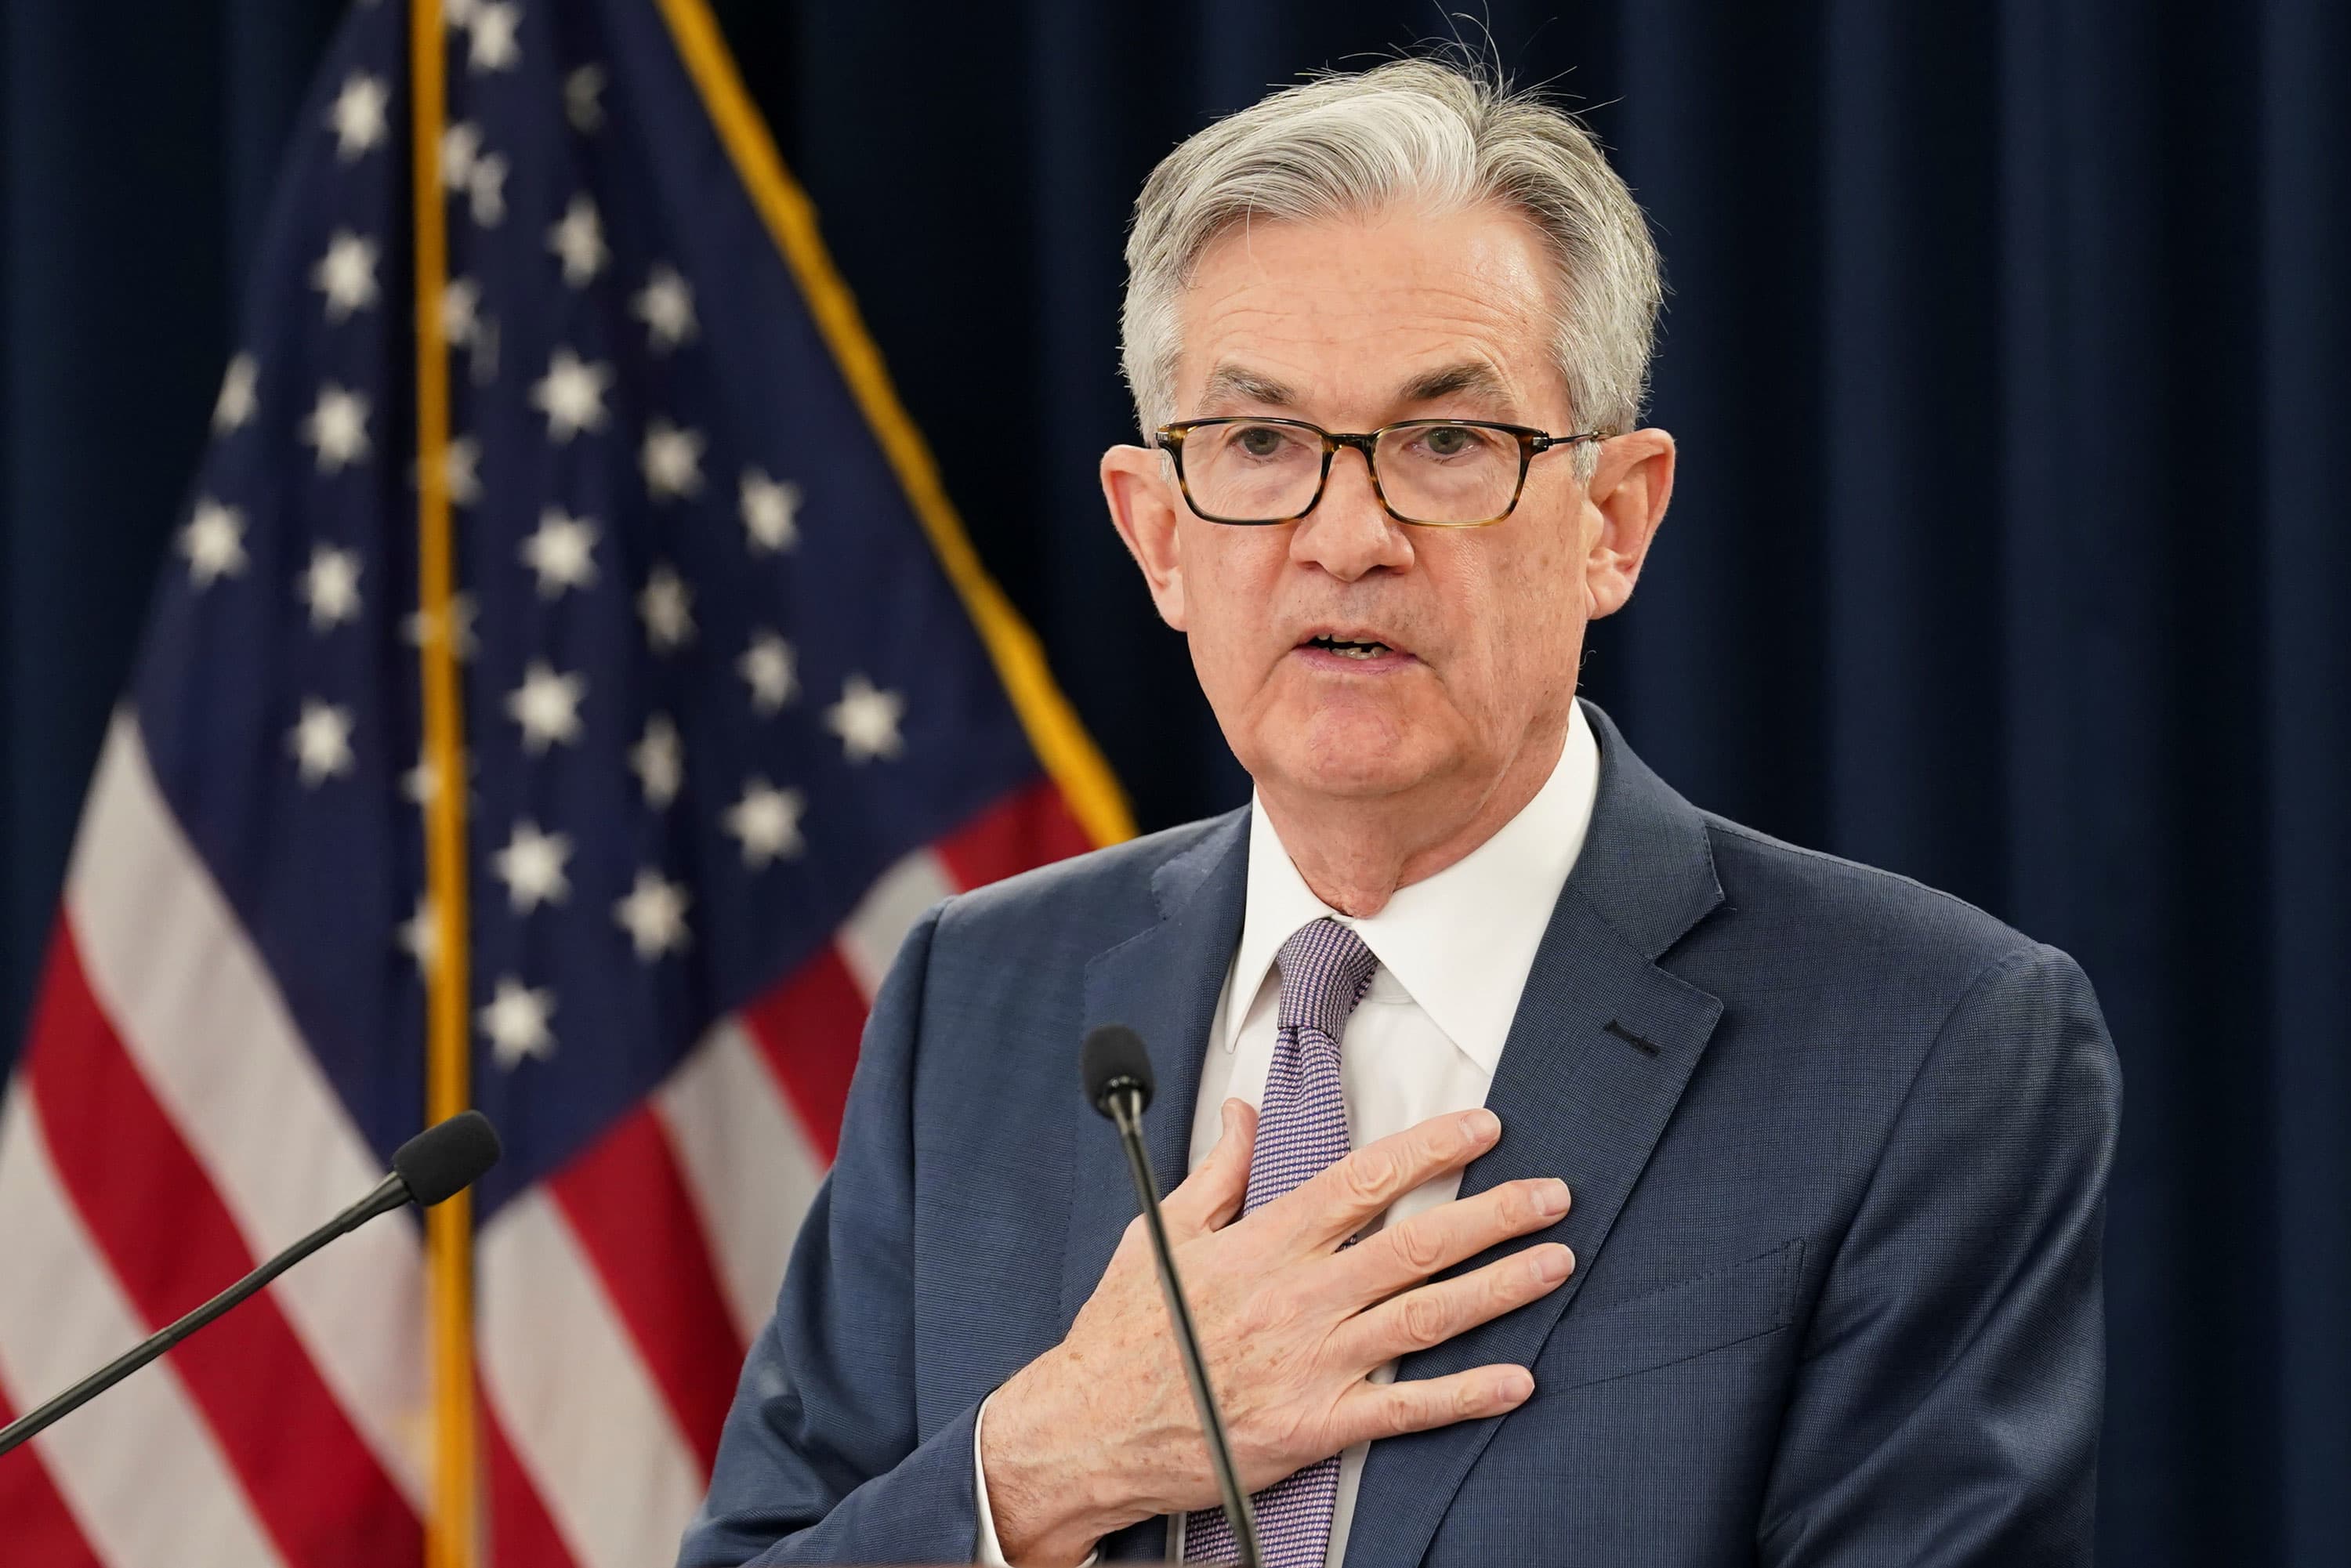 Powell says climate change is not a main factor in the Fed's policy decisions